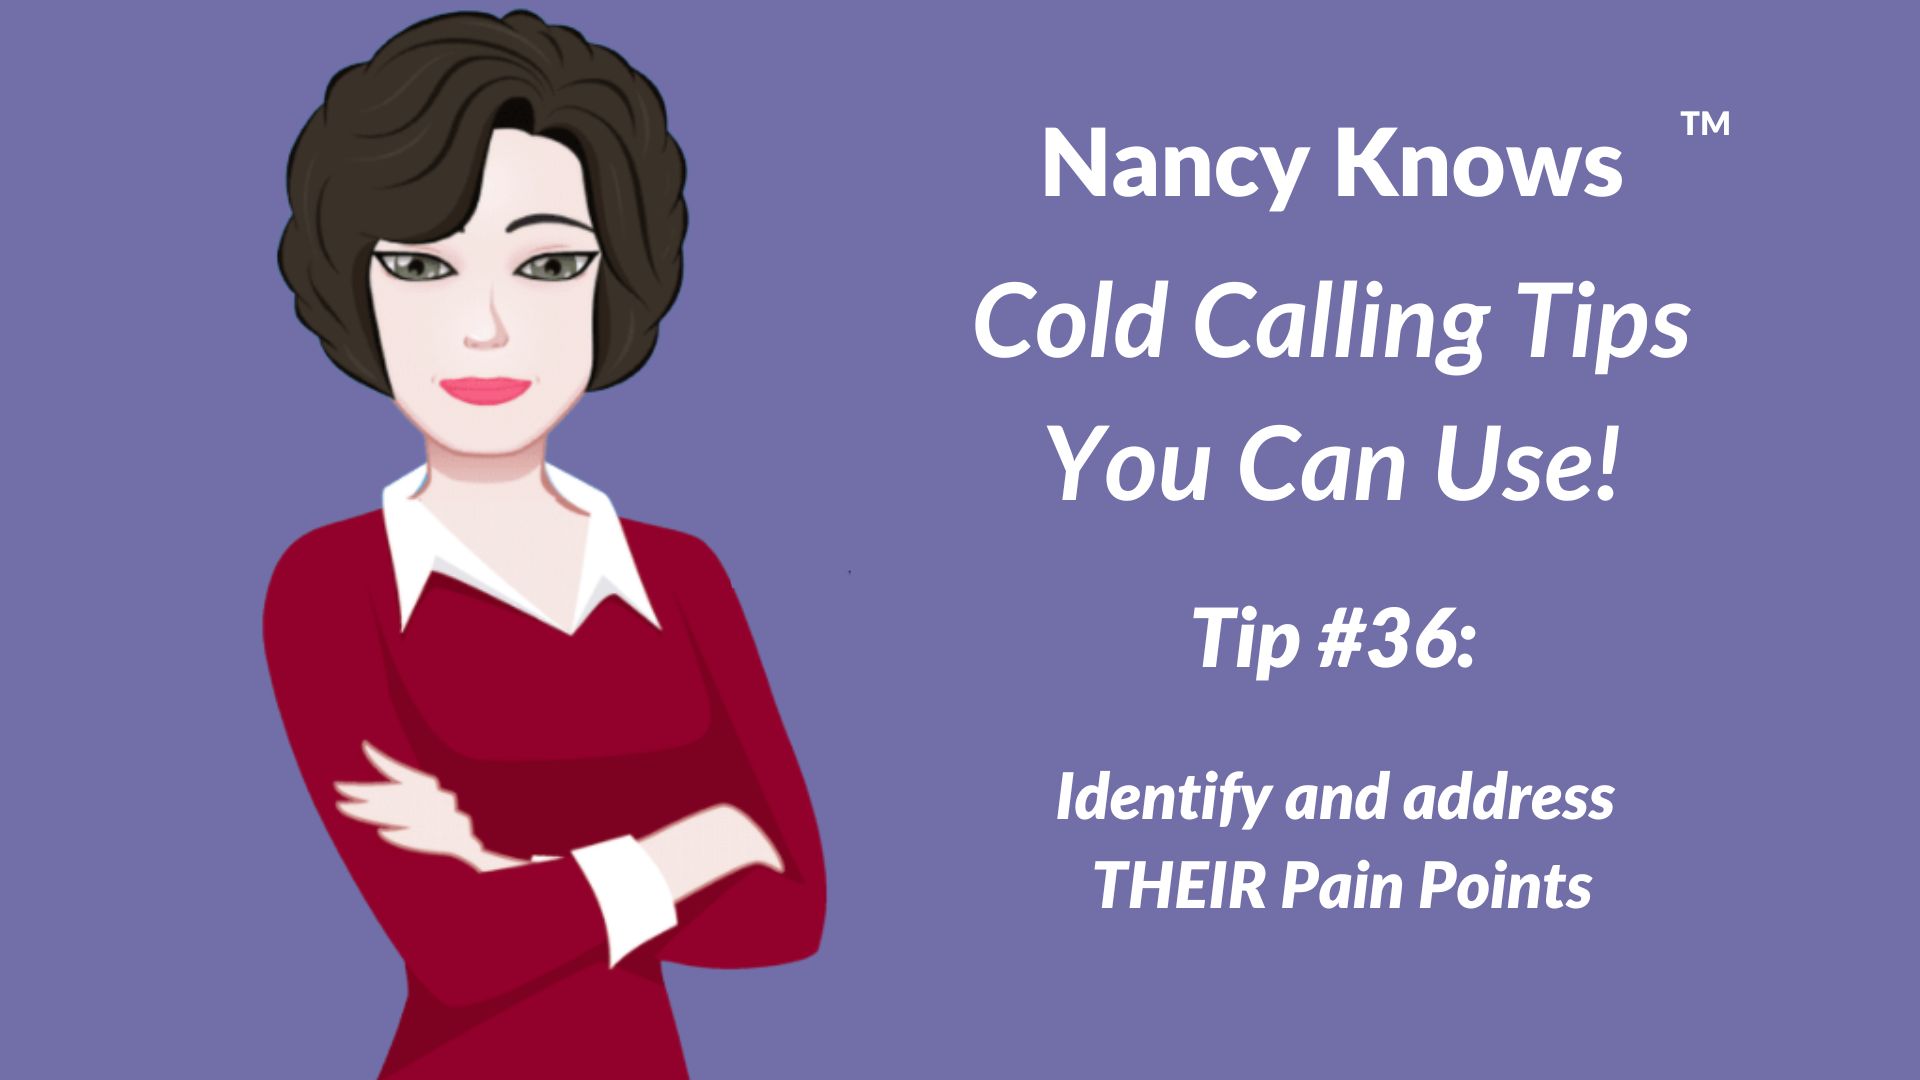 Nancy Knows #36: Identify and address THEIR Pain Points